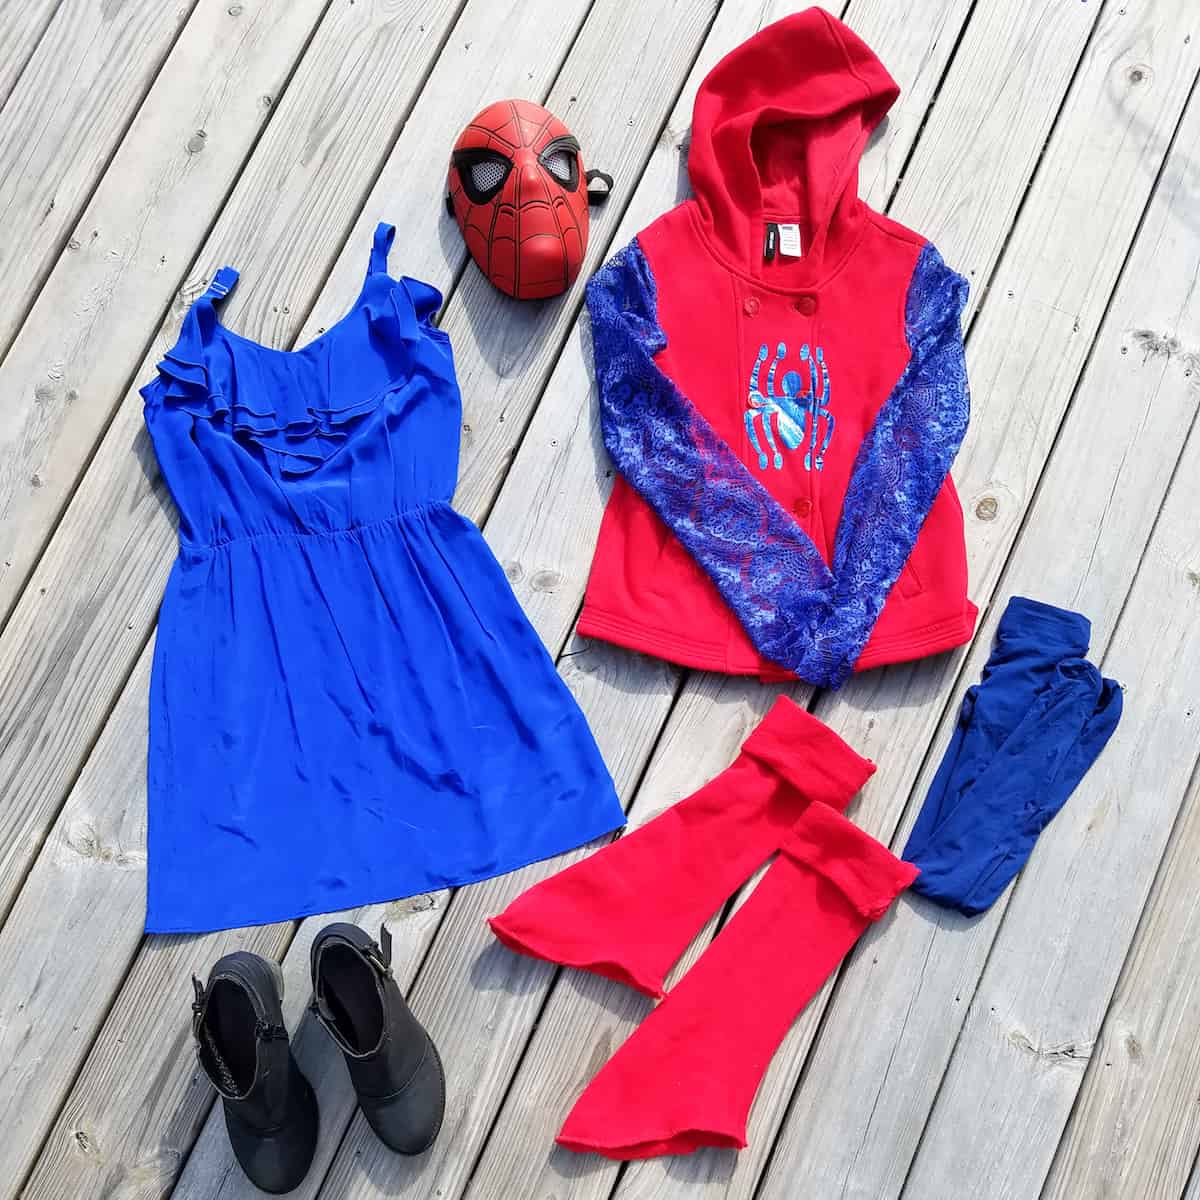 how to make a spiderman costume for girls from Spider-Man Homecoming